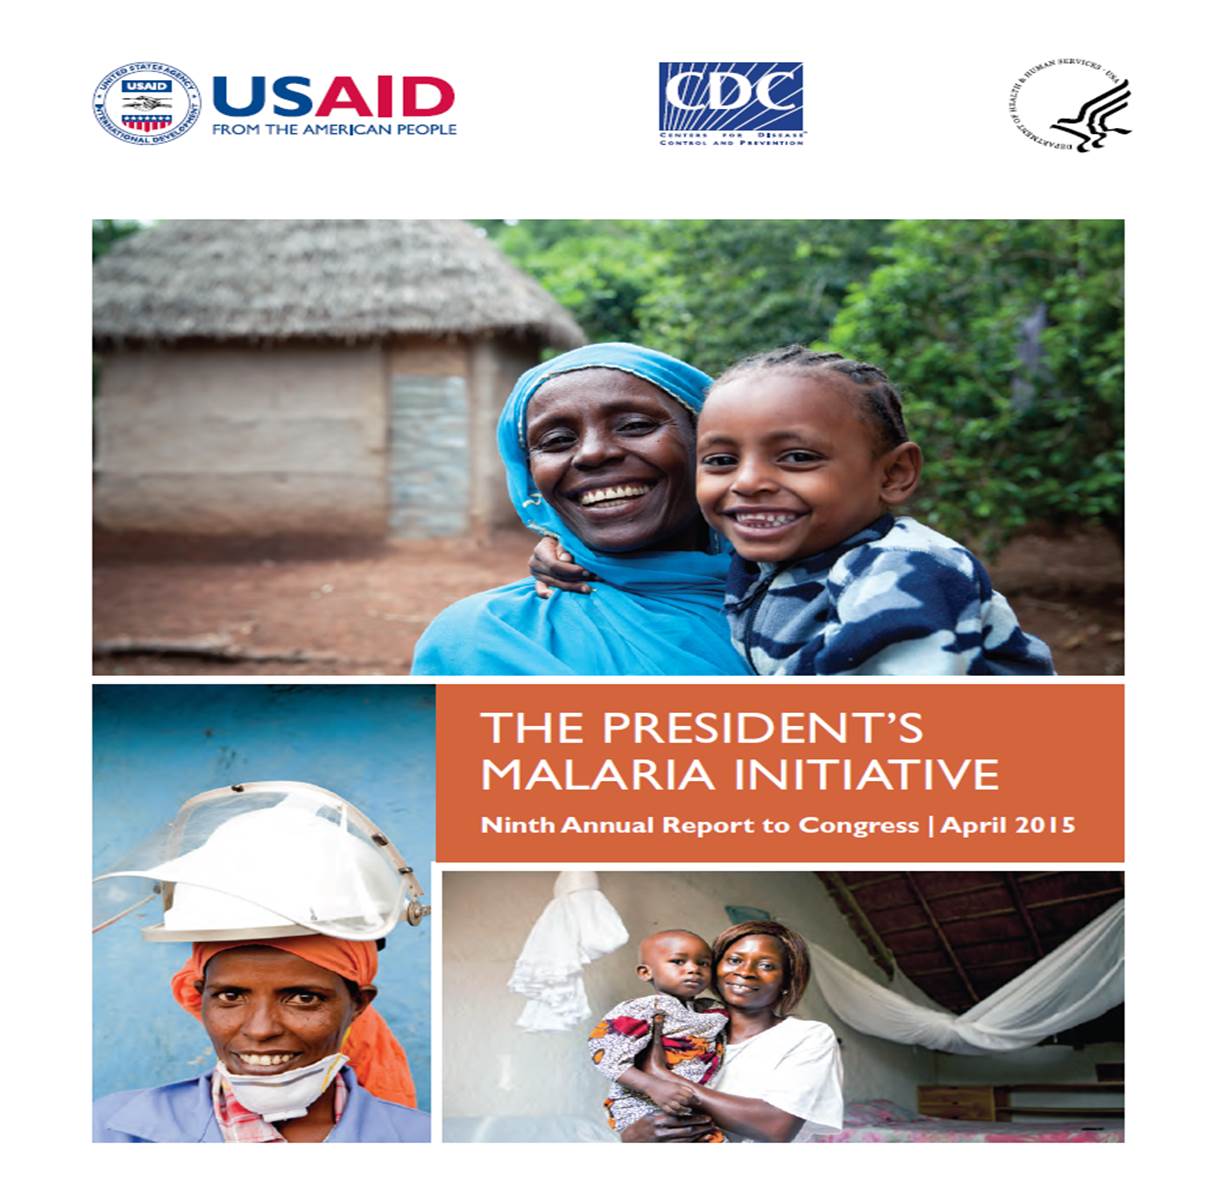 President's Malaria Initiative: Ninth Annual Report to Congress